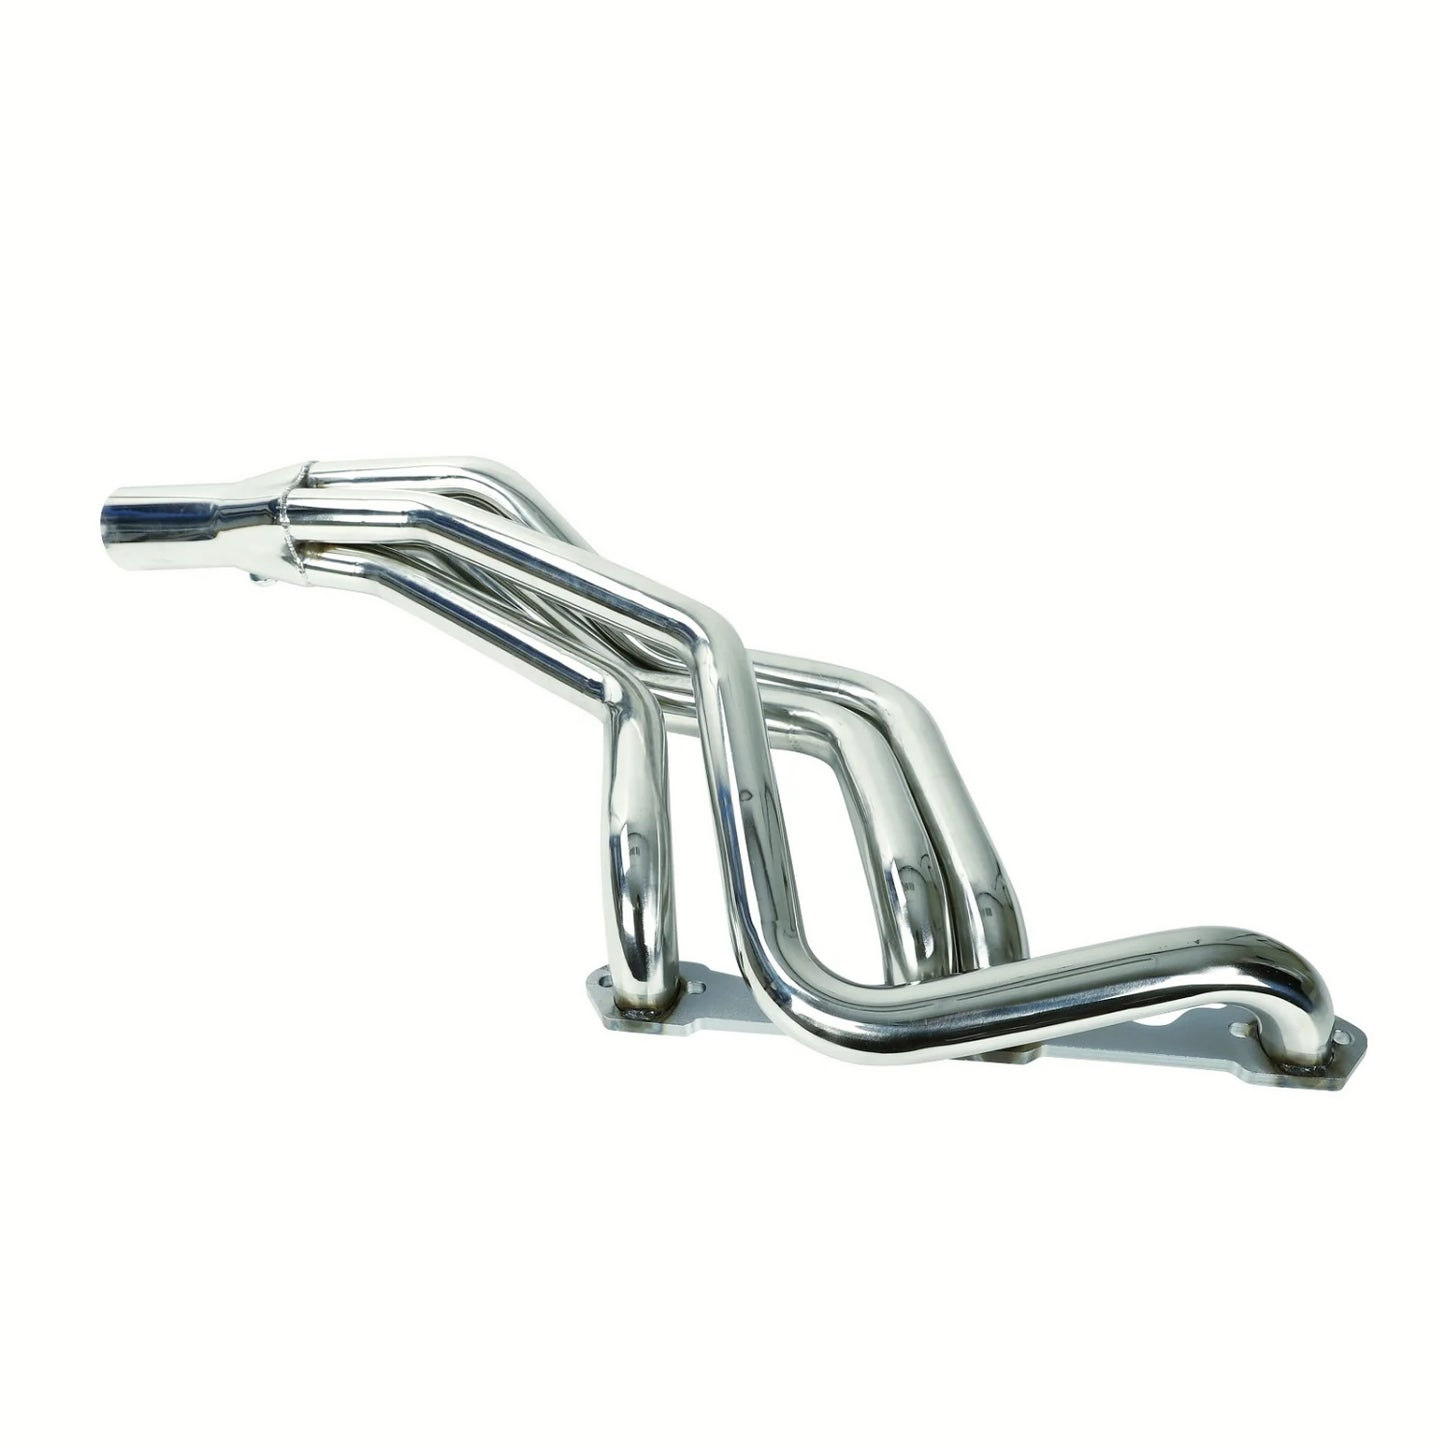 Stainless Headers Exhaust Manifold For 1993-1997 Chevy Camaro/Firebird 5.7L LT1 V8